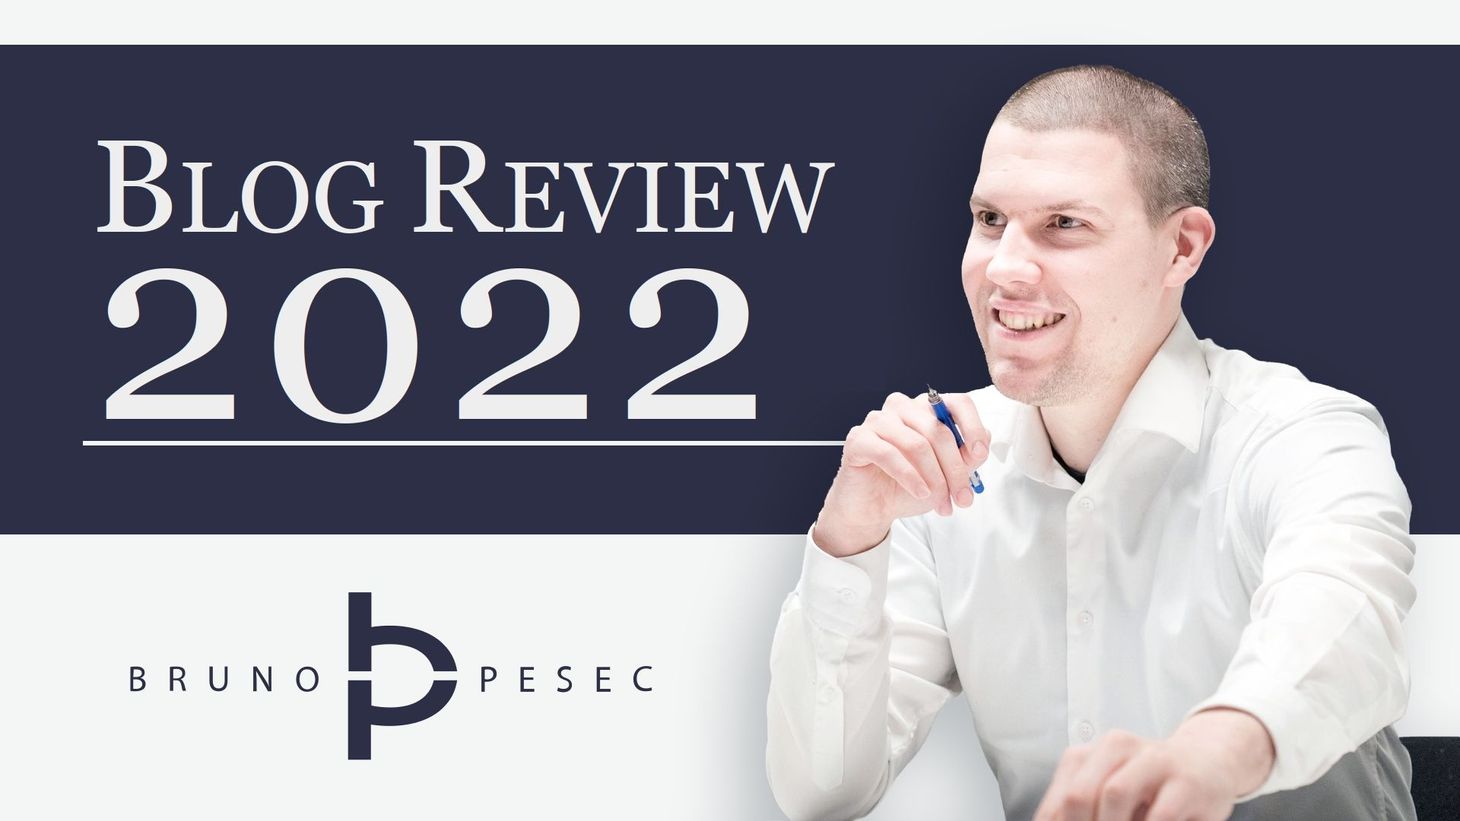 Blog review 2022